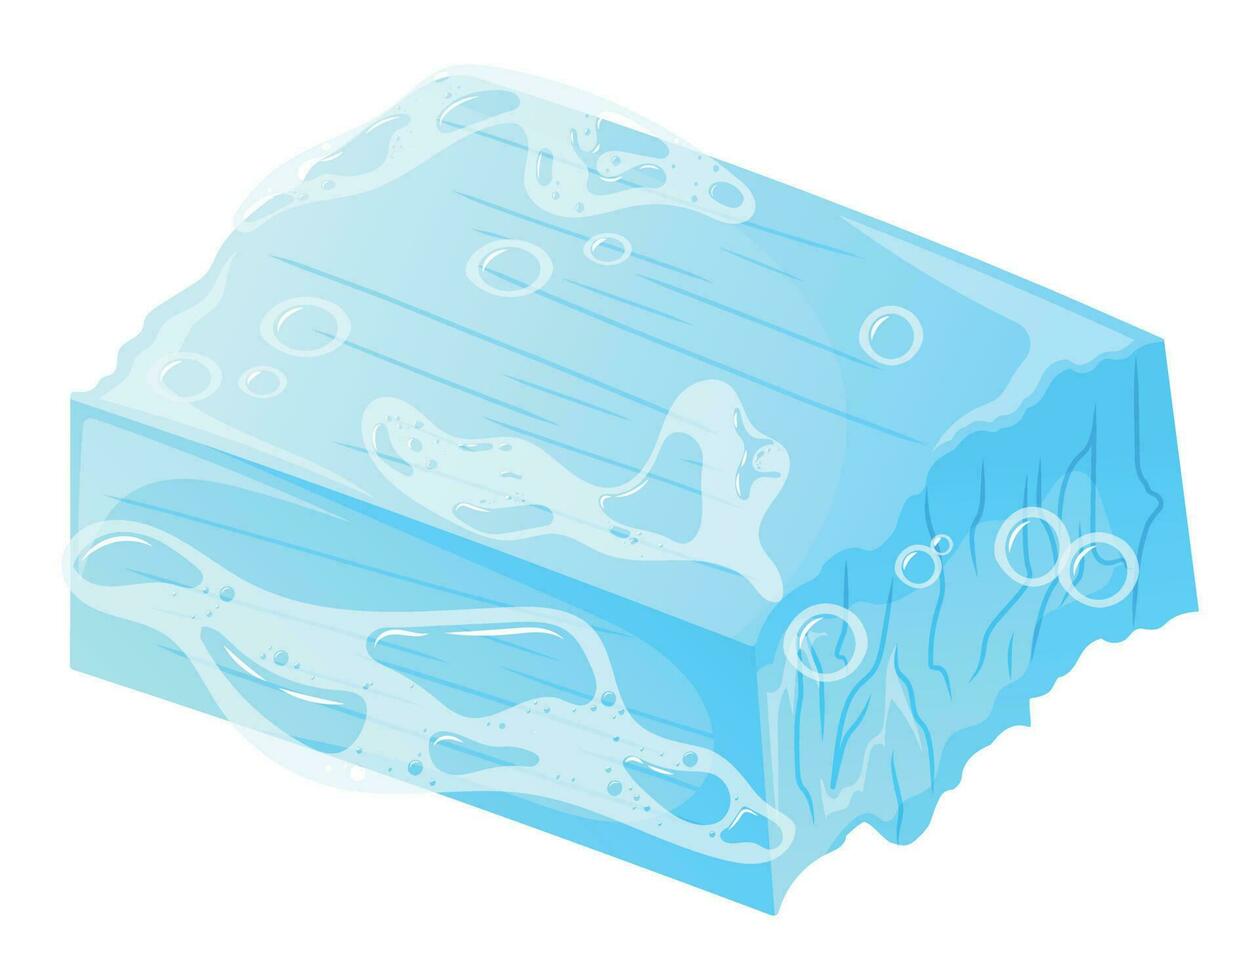 Handmade blue soap bar with foam and bubbles. Vector isolated cartoon illustration of natural hygiene product.